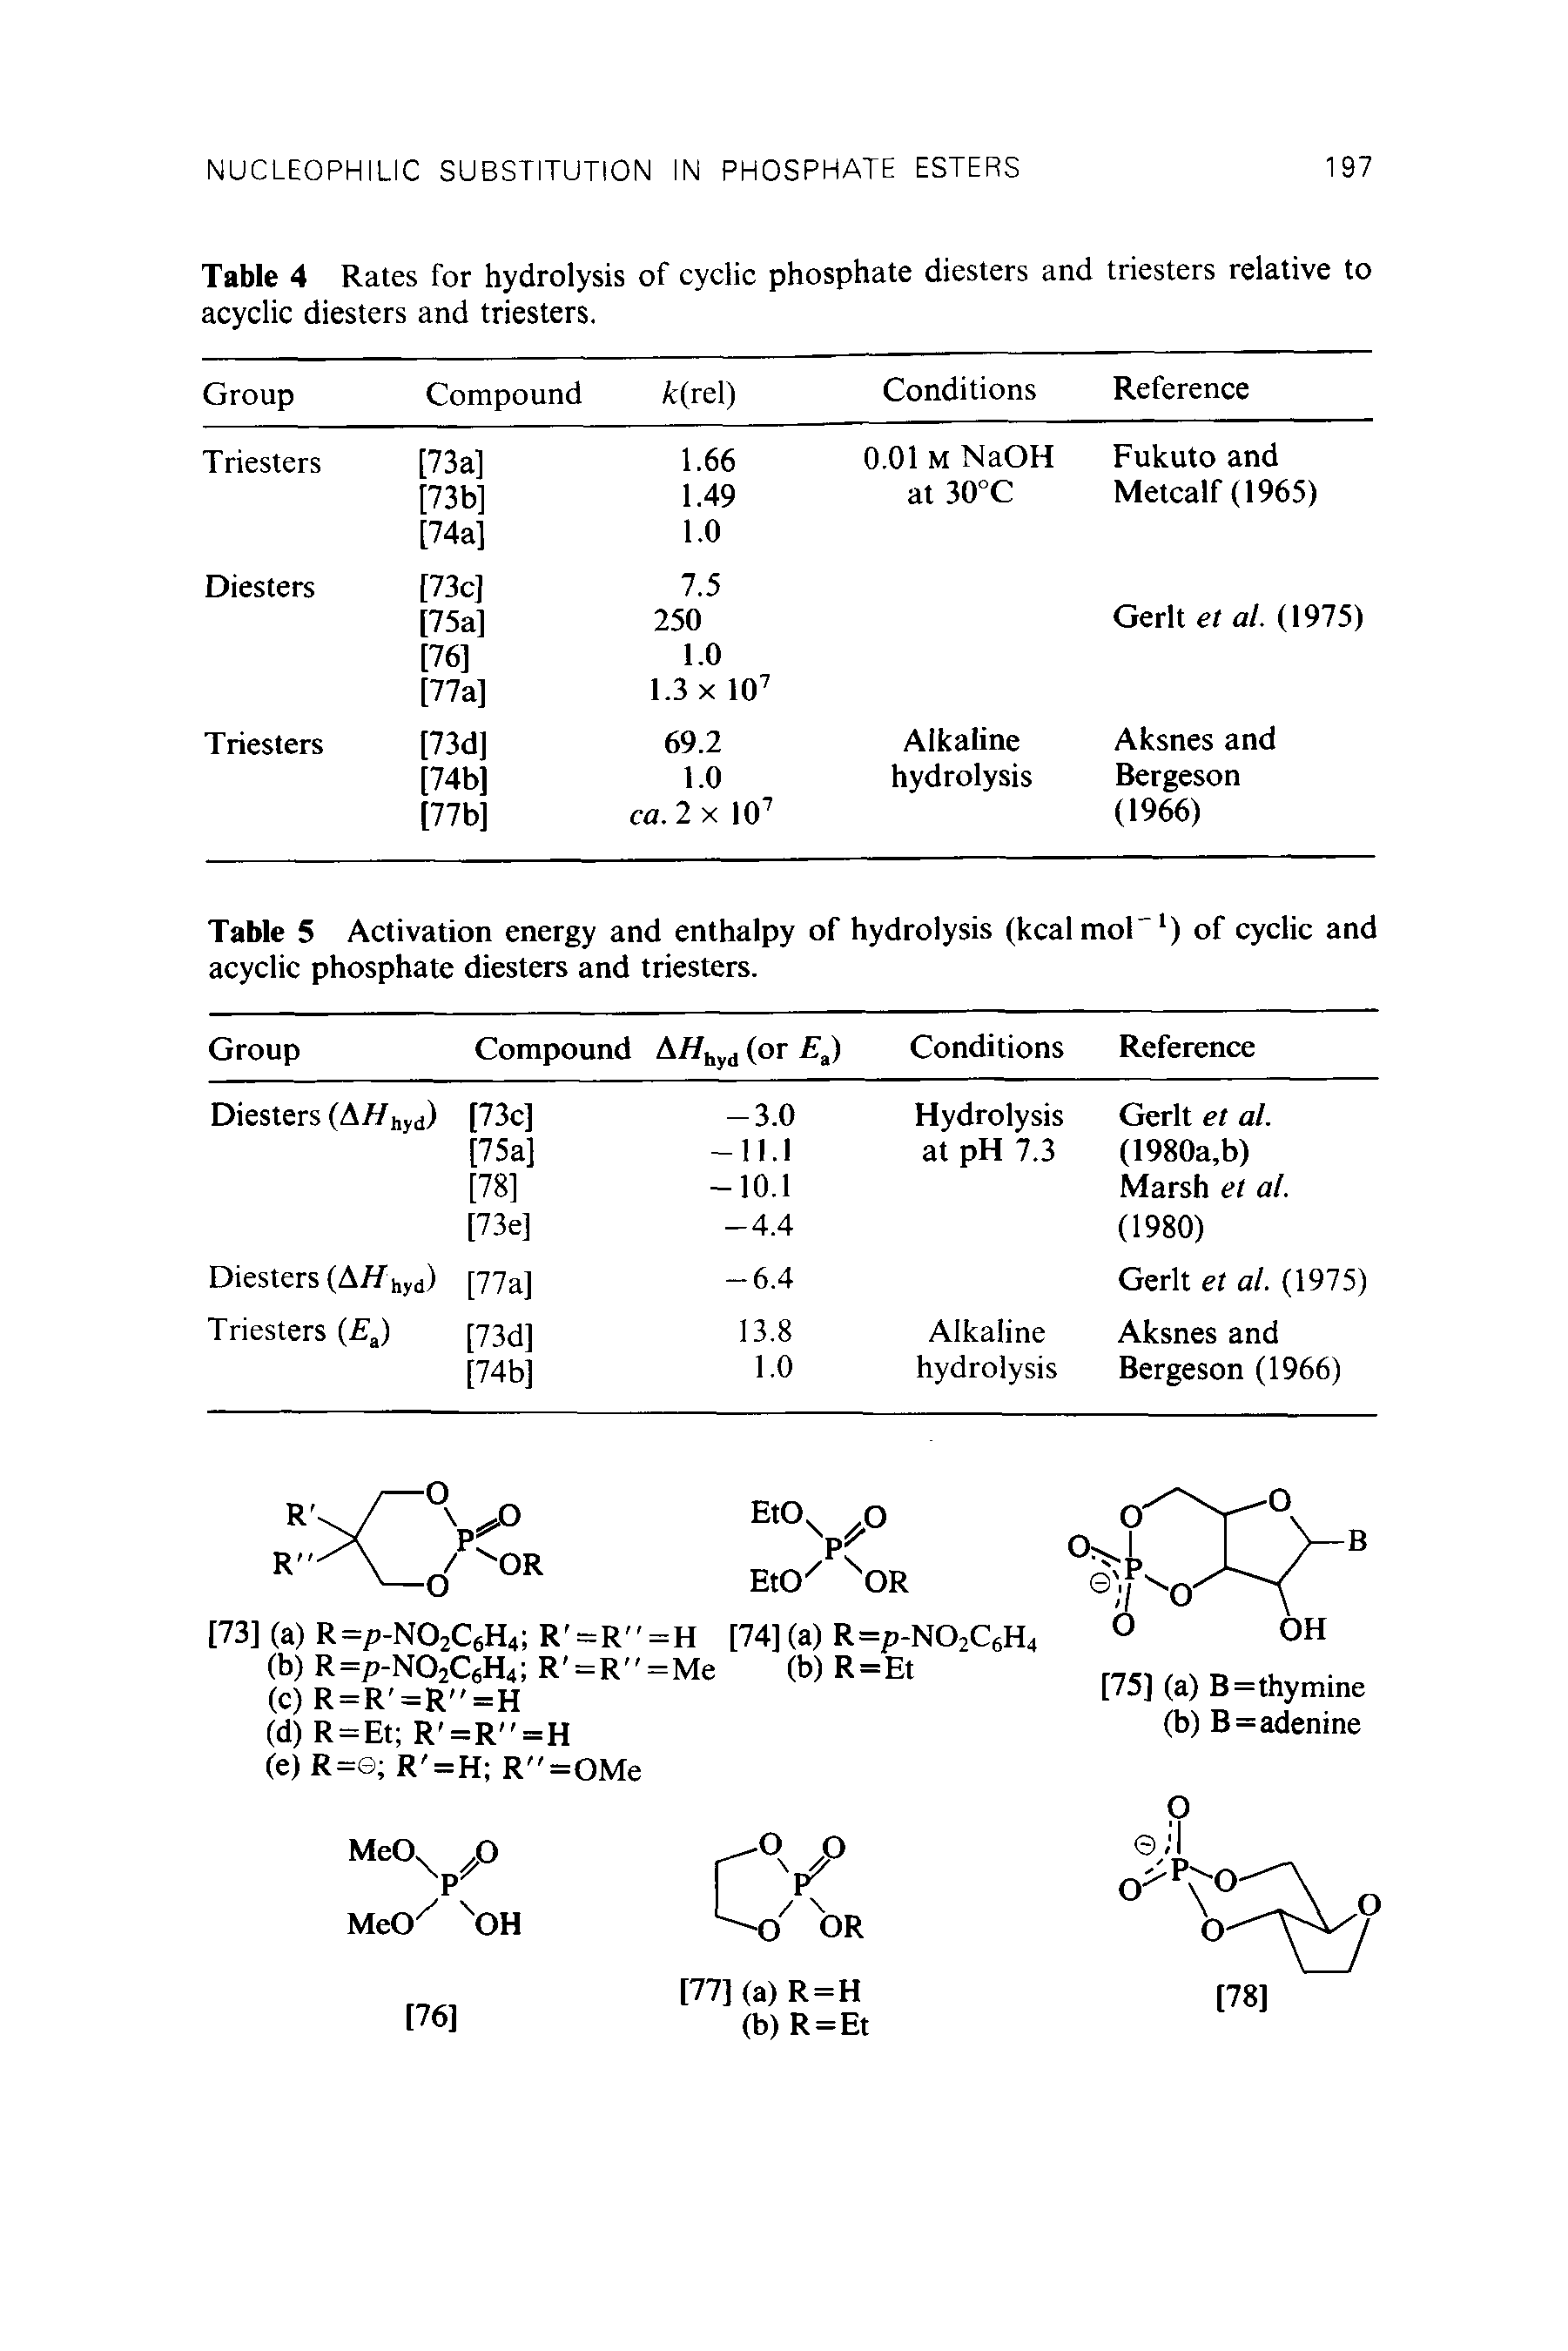 Table 4 Rates for hydrolysis of cyclic phosphate diesters and triesters relative to acyclic diesters and triesters.